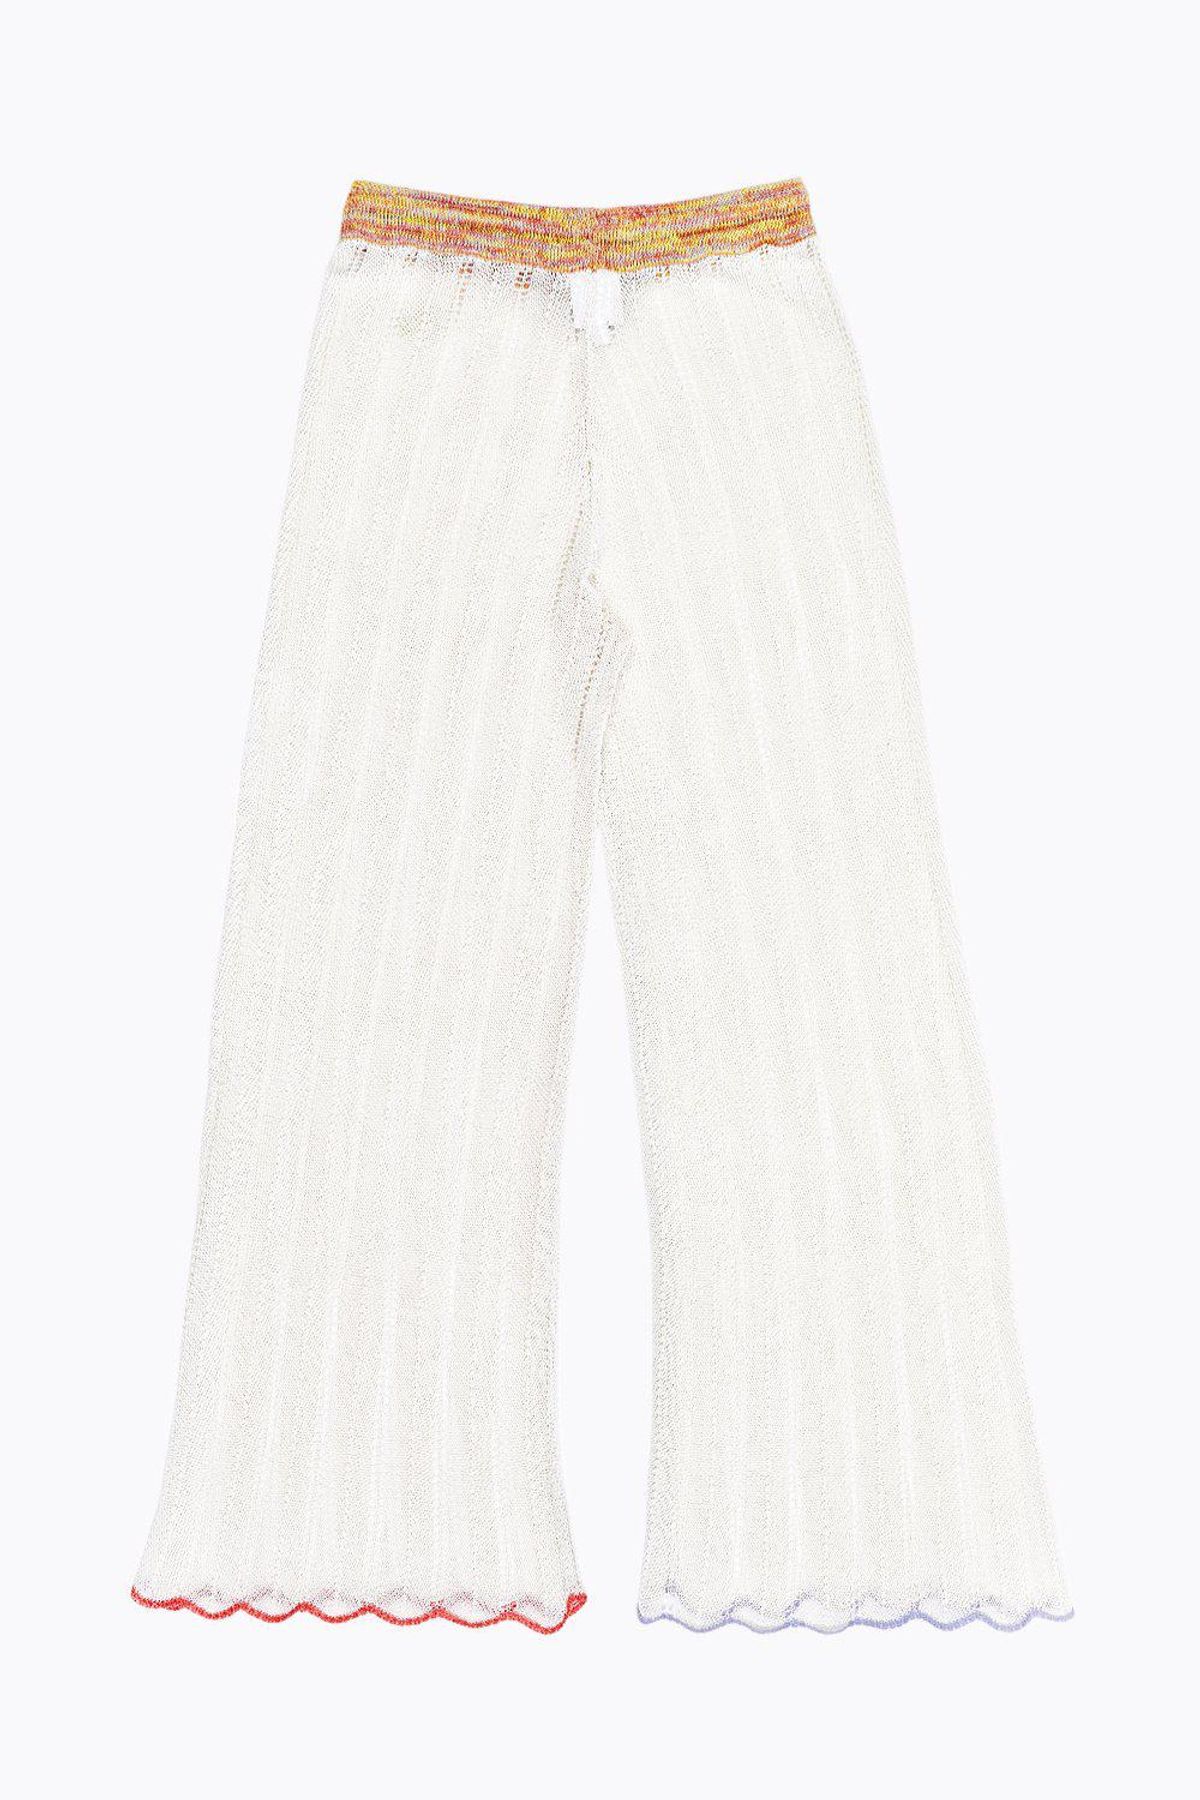 Honey Pant in Ivory Cotton Cord